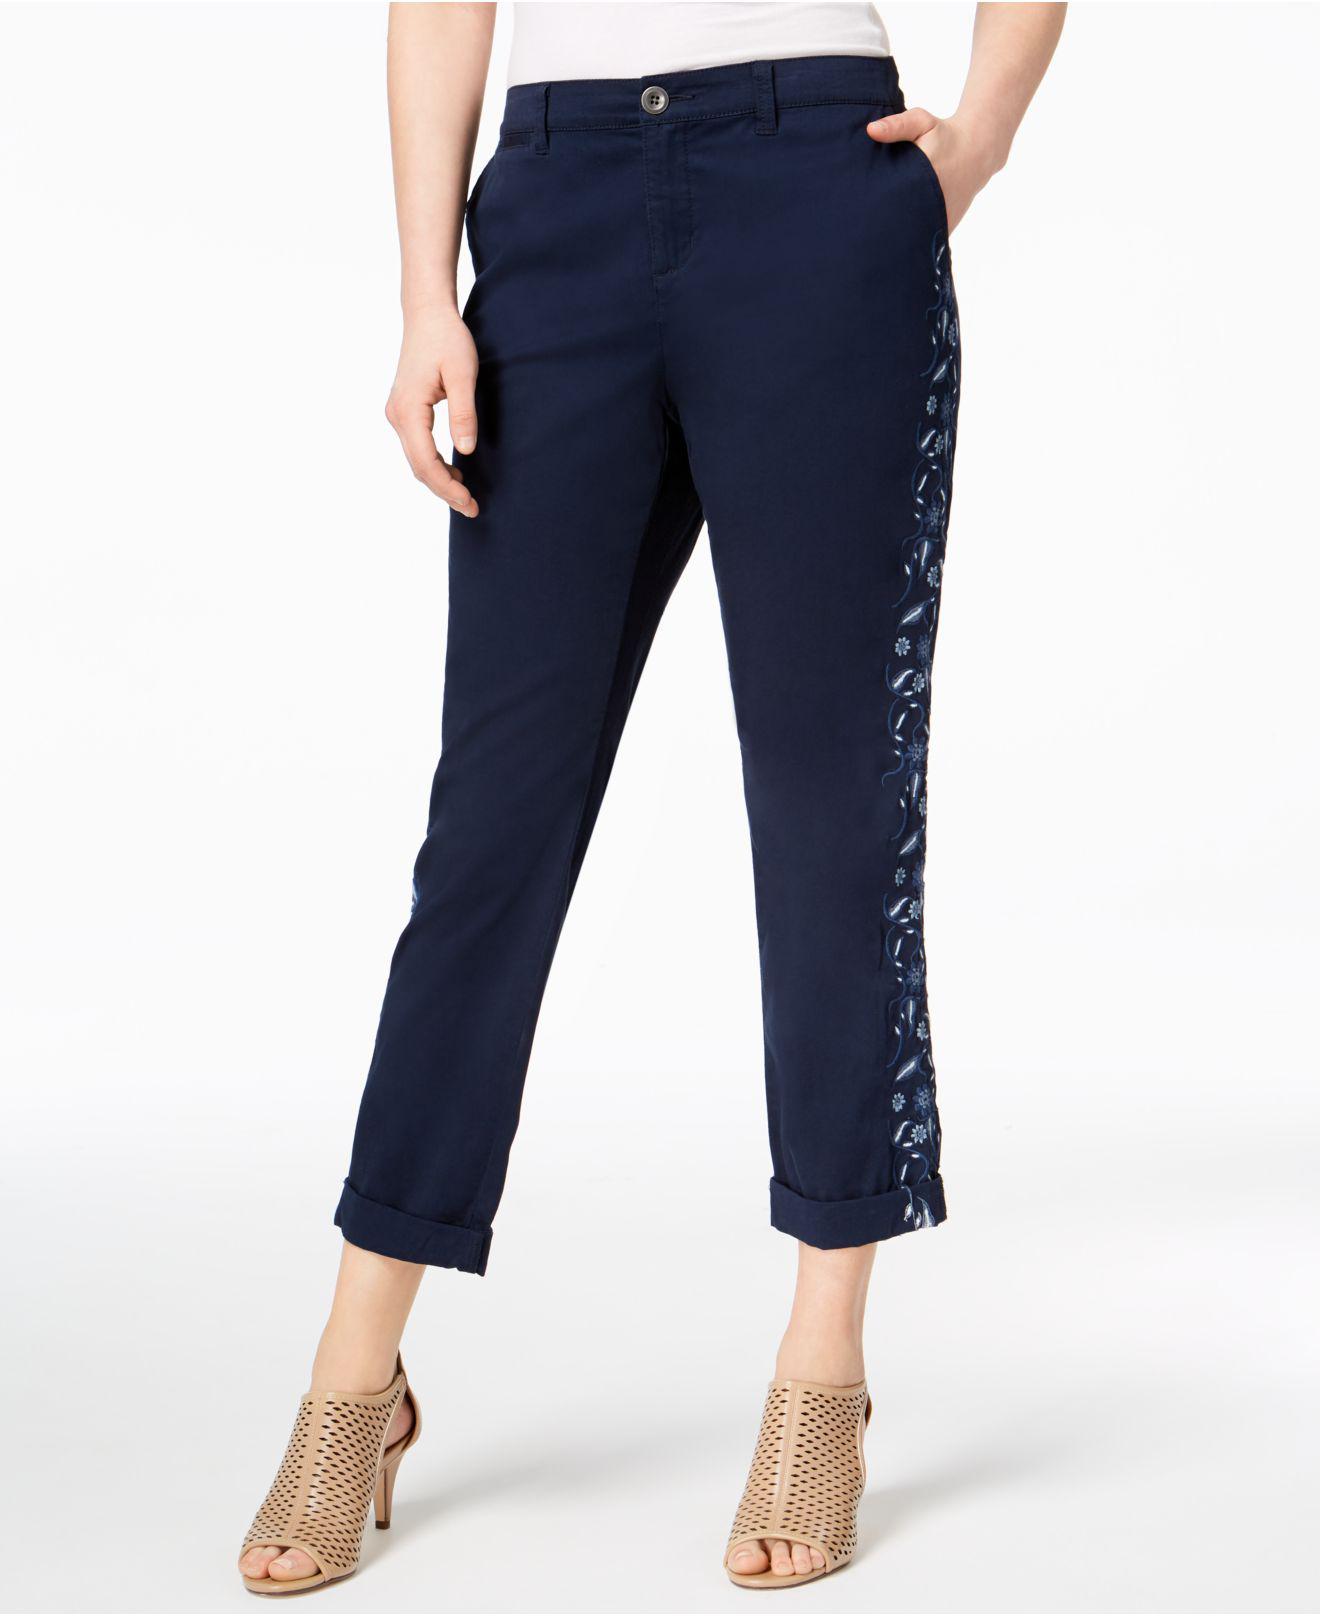 Style & Co. Cotton Embroidered Boyfriend Pants in Blue - Lyst